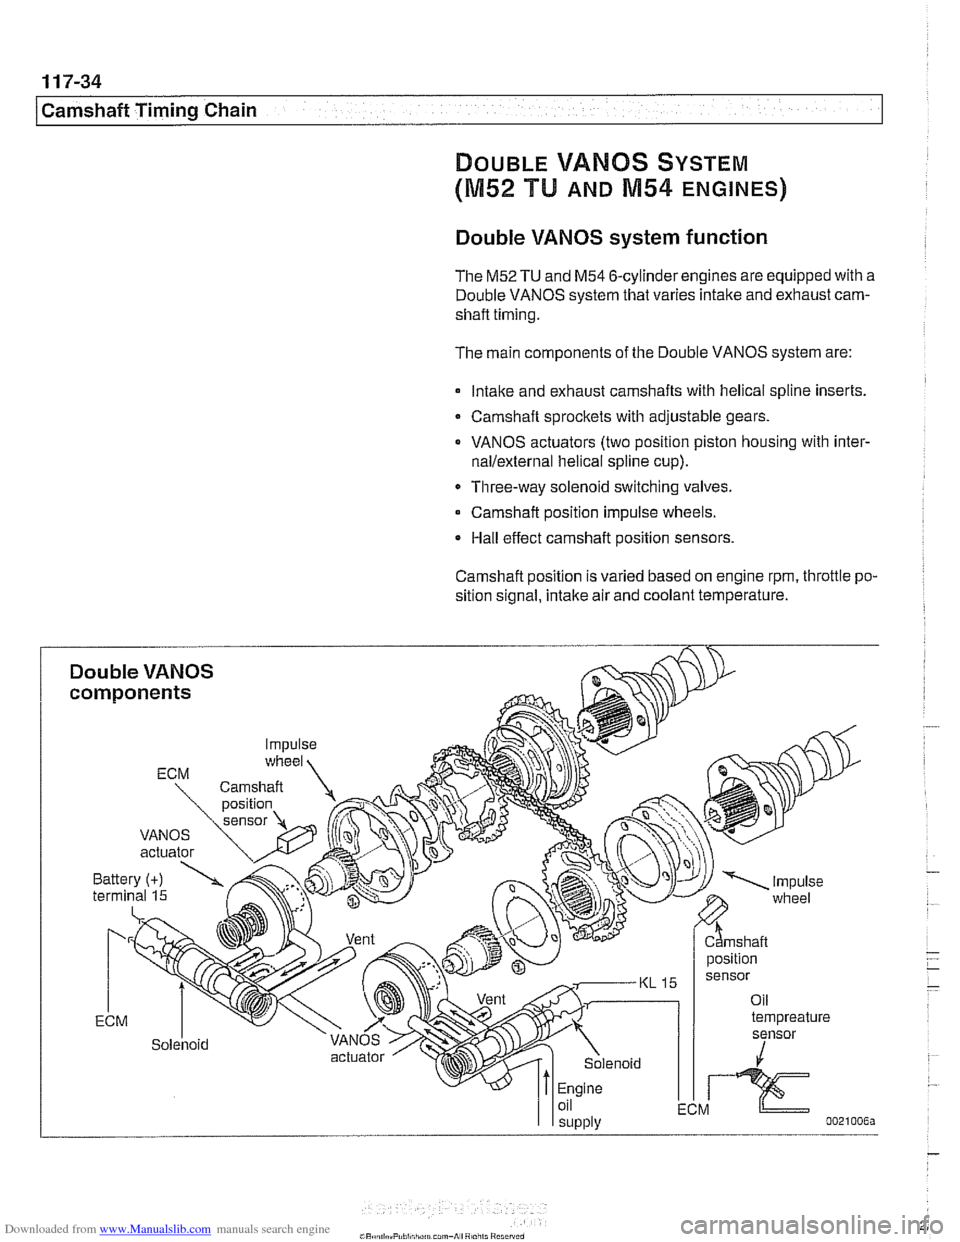 BMW 525i 2001 E39 Workshop Manual Downloaded from www.Manualslib.com manuals search engine 
1 17-34 
1 Camshaft Timing Chain 
DOUBLE VAMOS SYSTEM 
(M52 TU AND M54 ENGINES) 
Double VANOS system function 
The M52TU and M54 6-cylinder  e